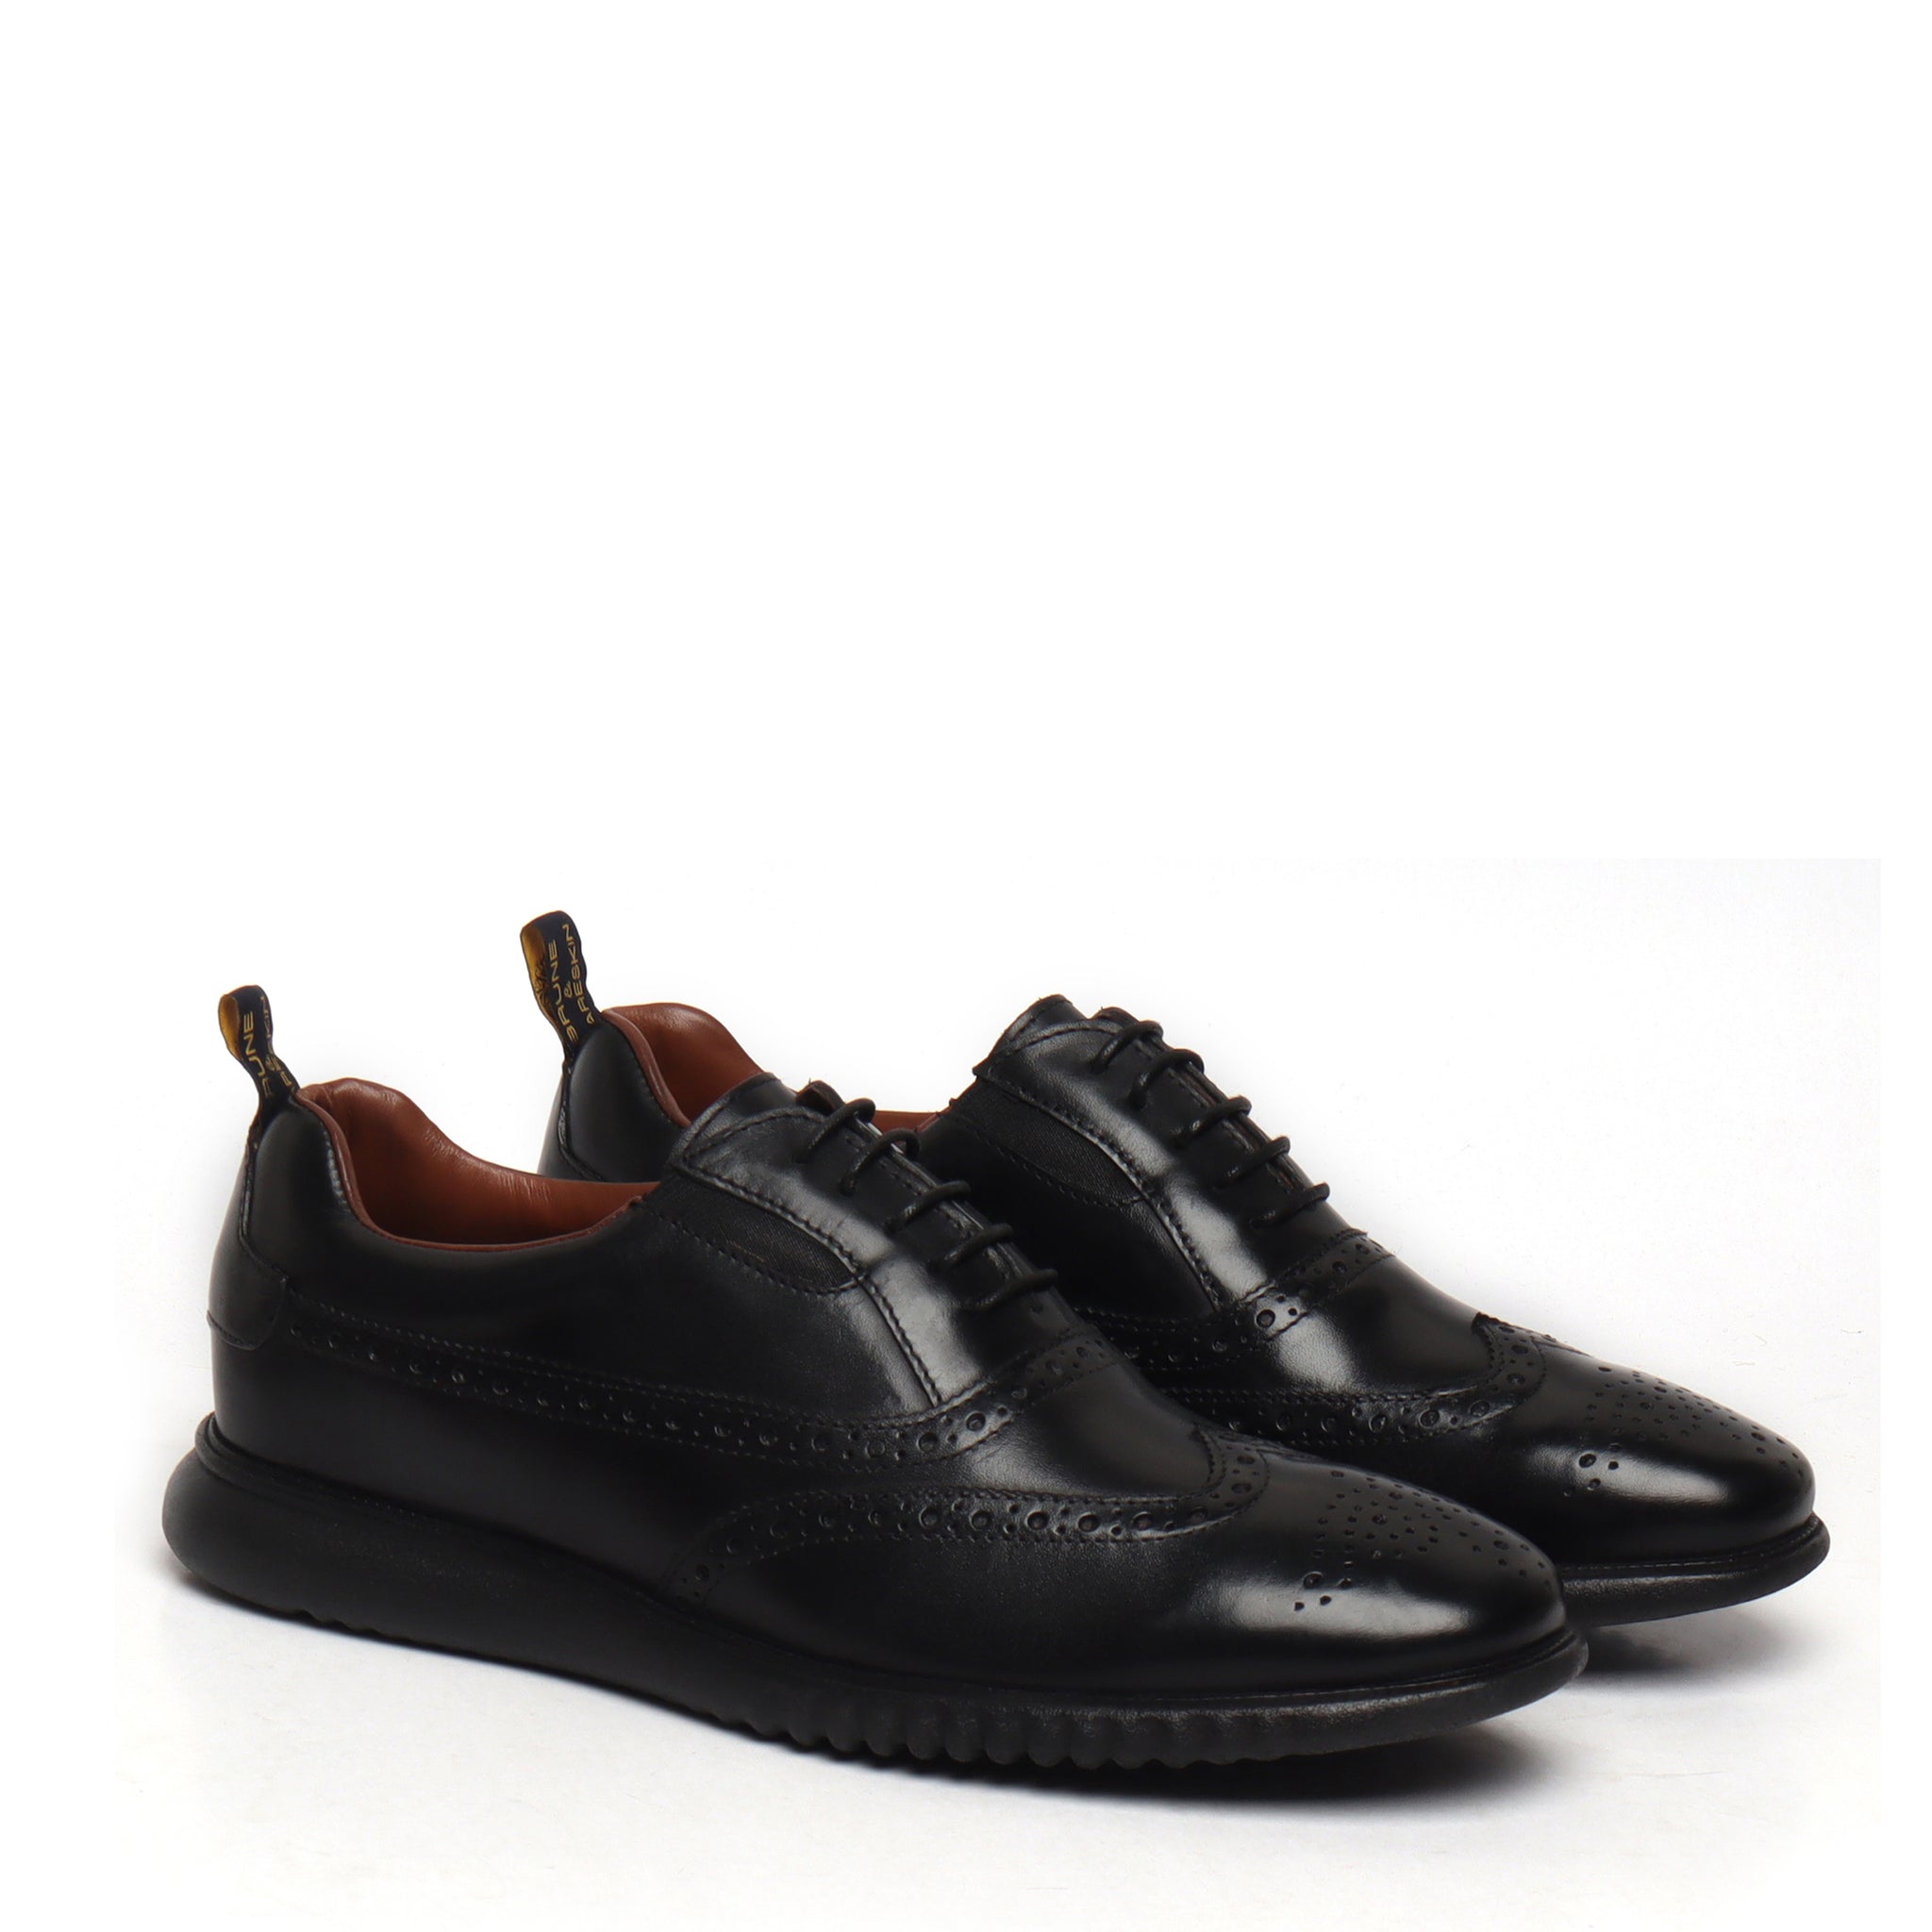 Light Weight Black Sneakers With Punching Brogue Oxford Lace-Up Closure